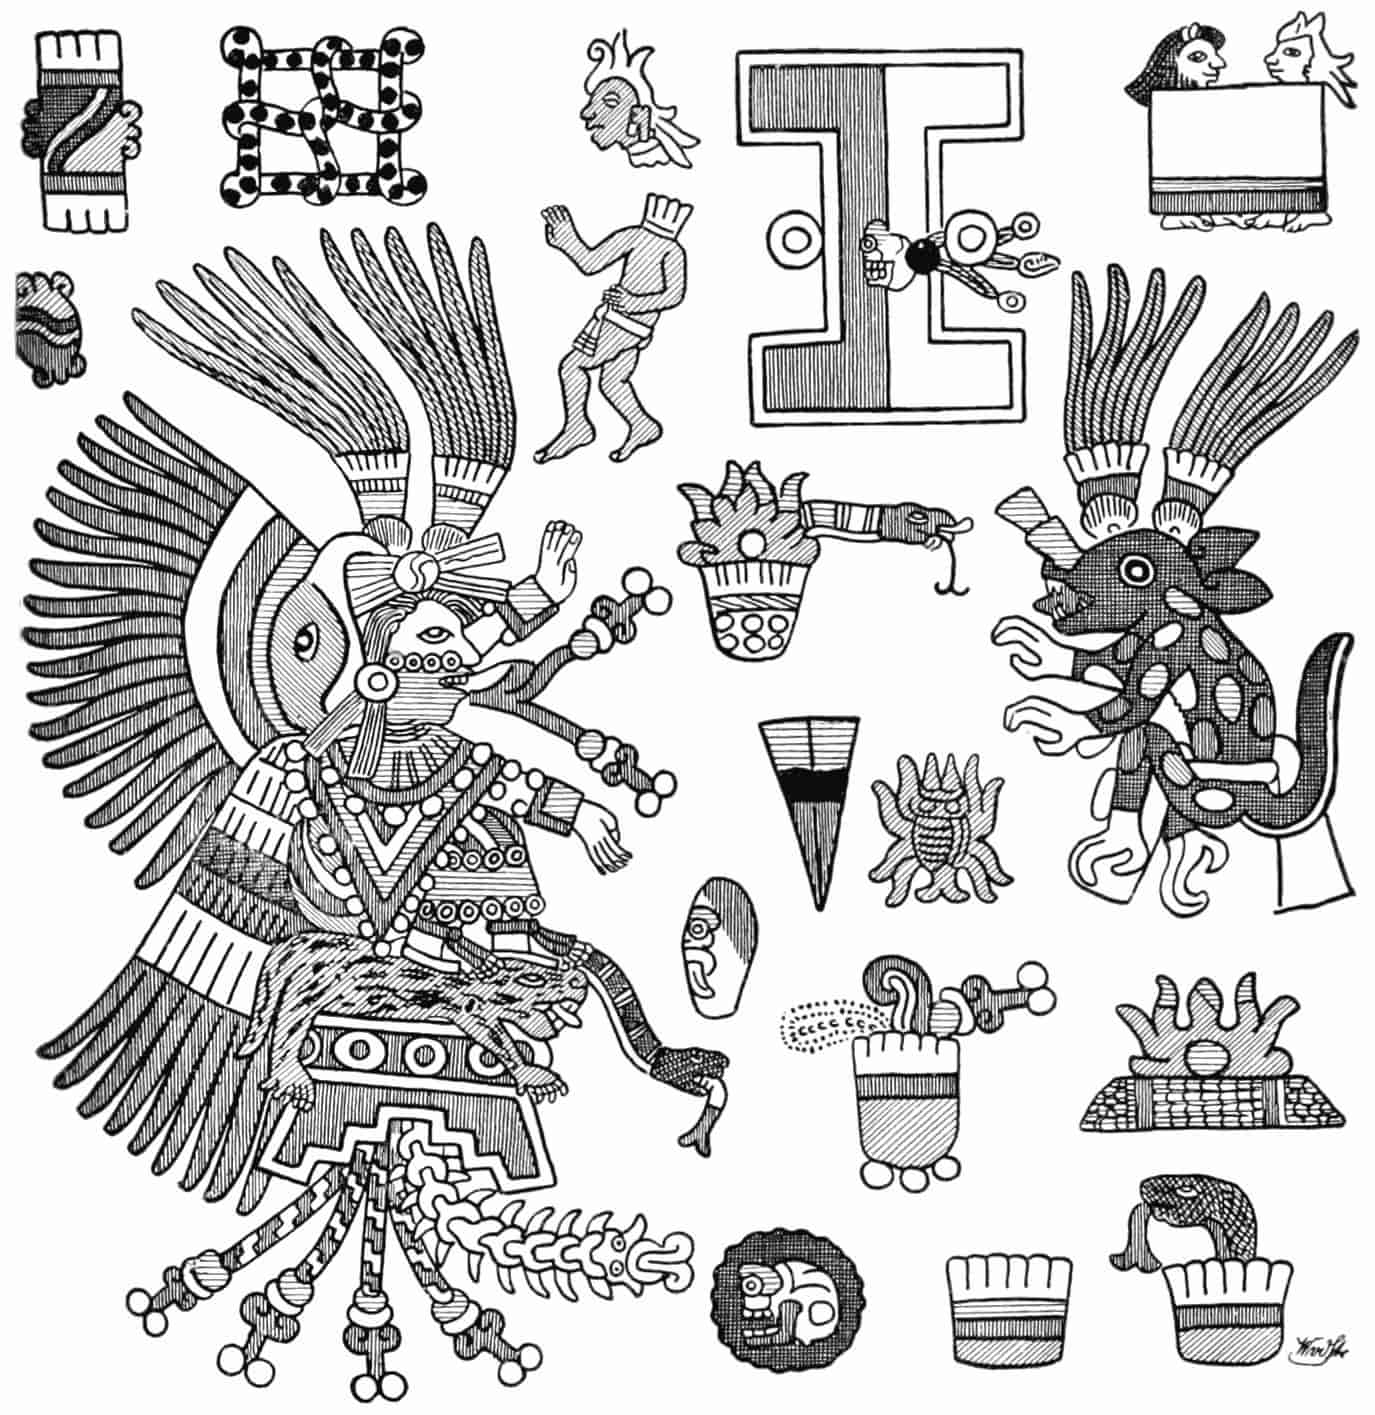 XOCHIQUETZAL AND HER SYMBOLS.